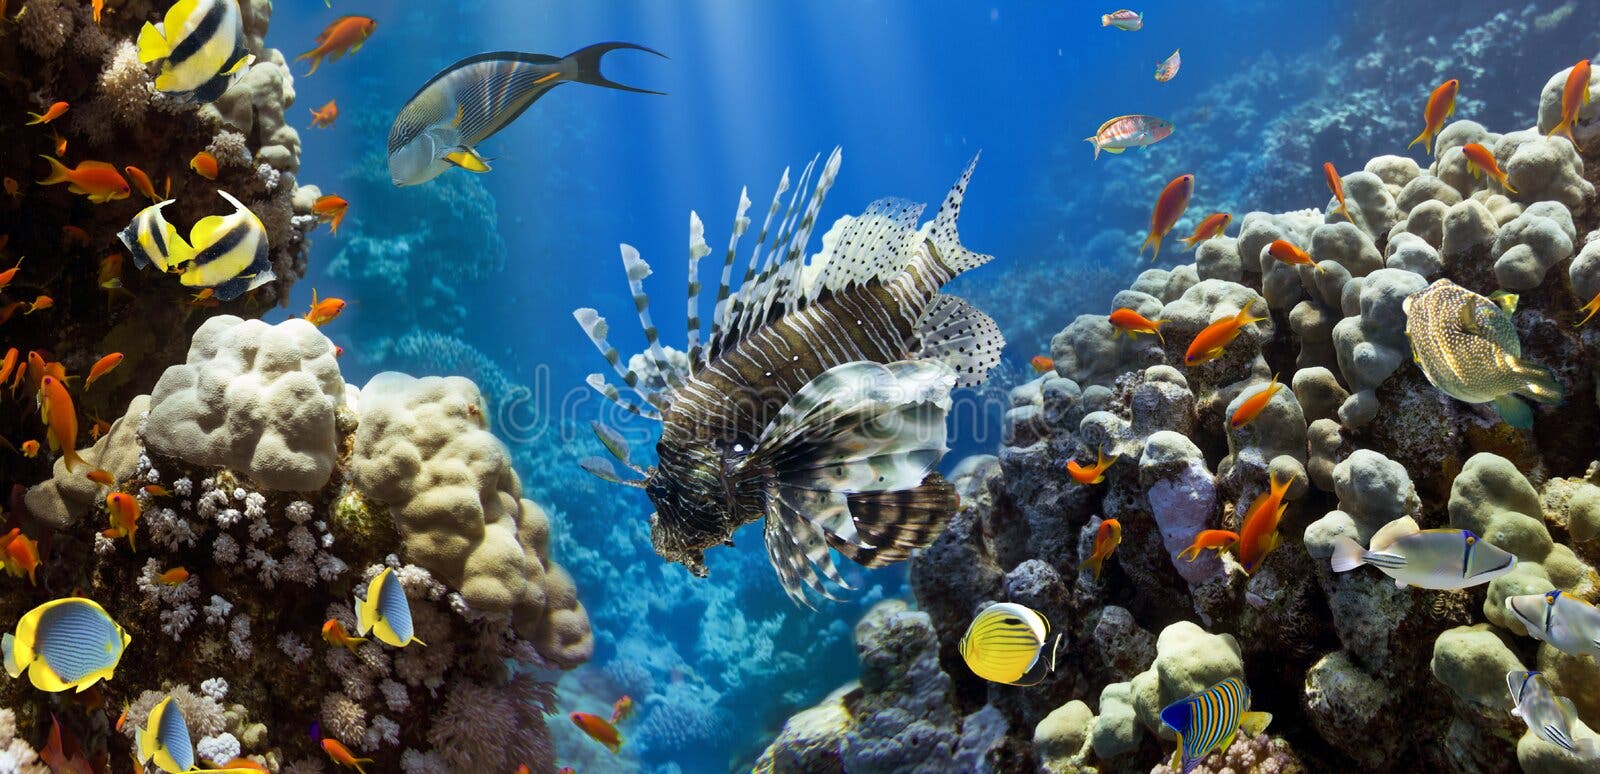 Tropical fishes stock image. Image of deep, colony, beautiful - 20626275